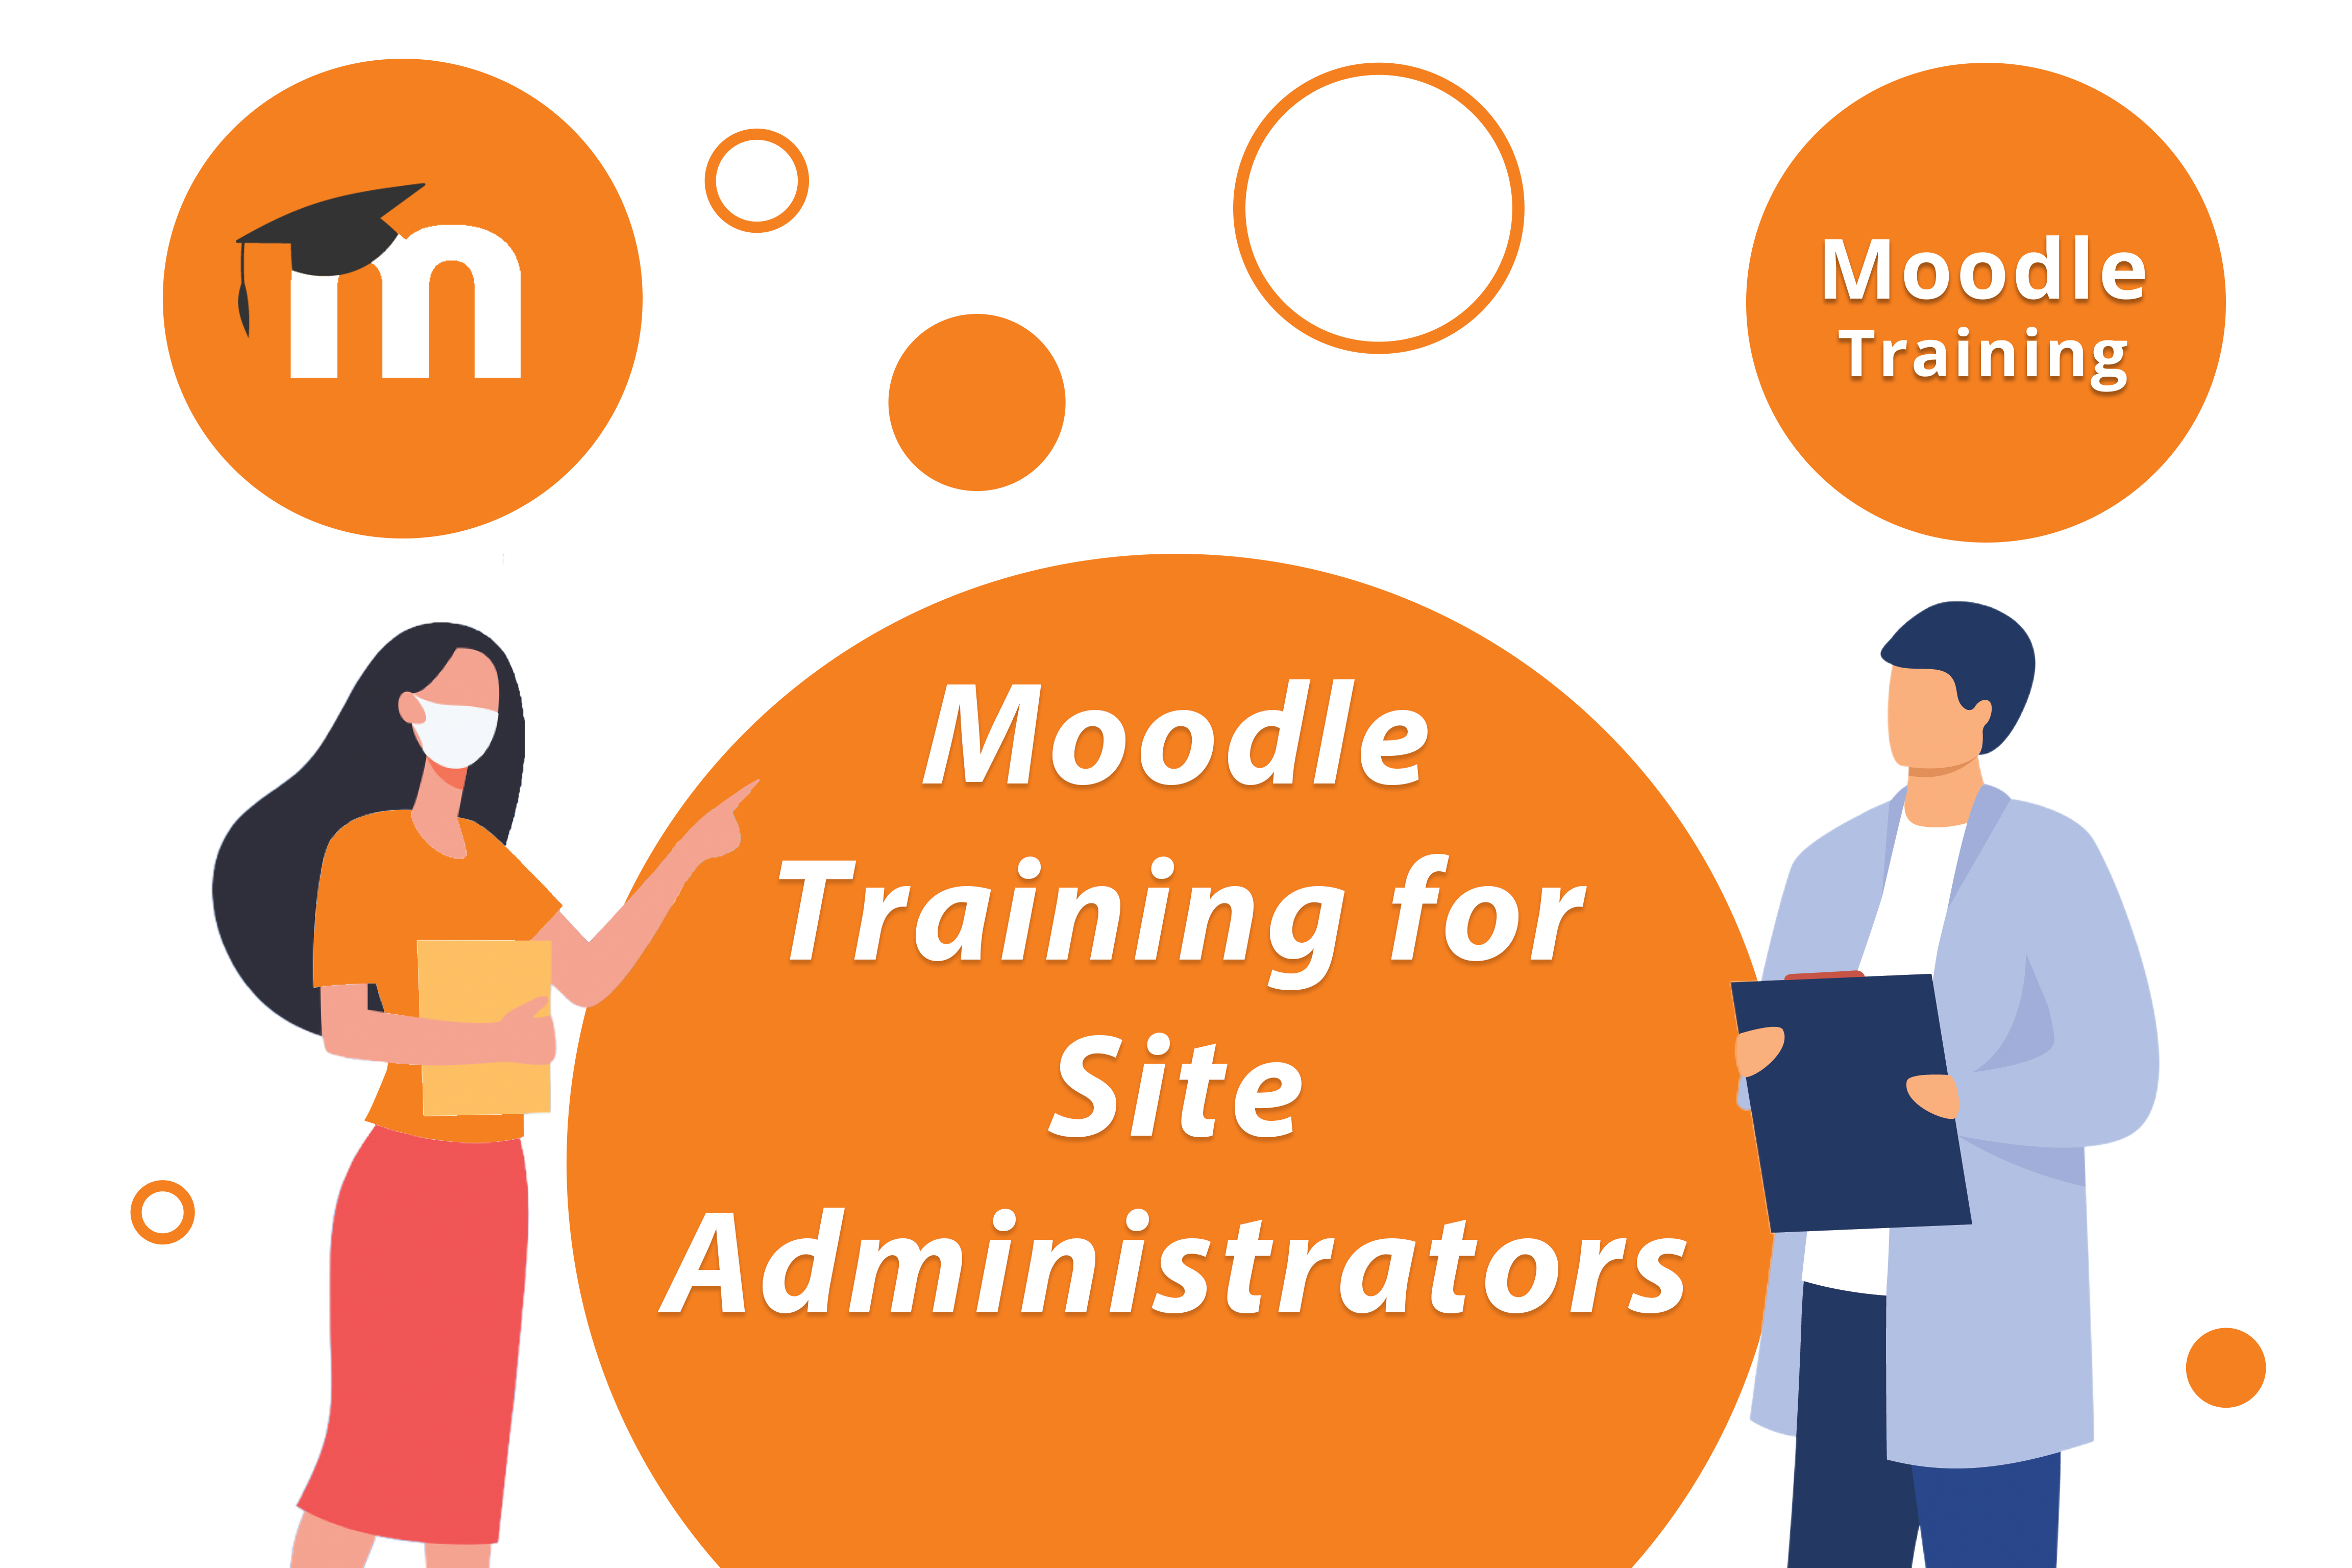 Moodle Training for Site Administrators